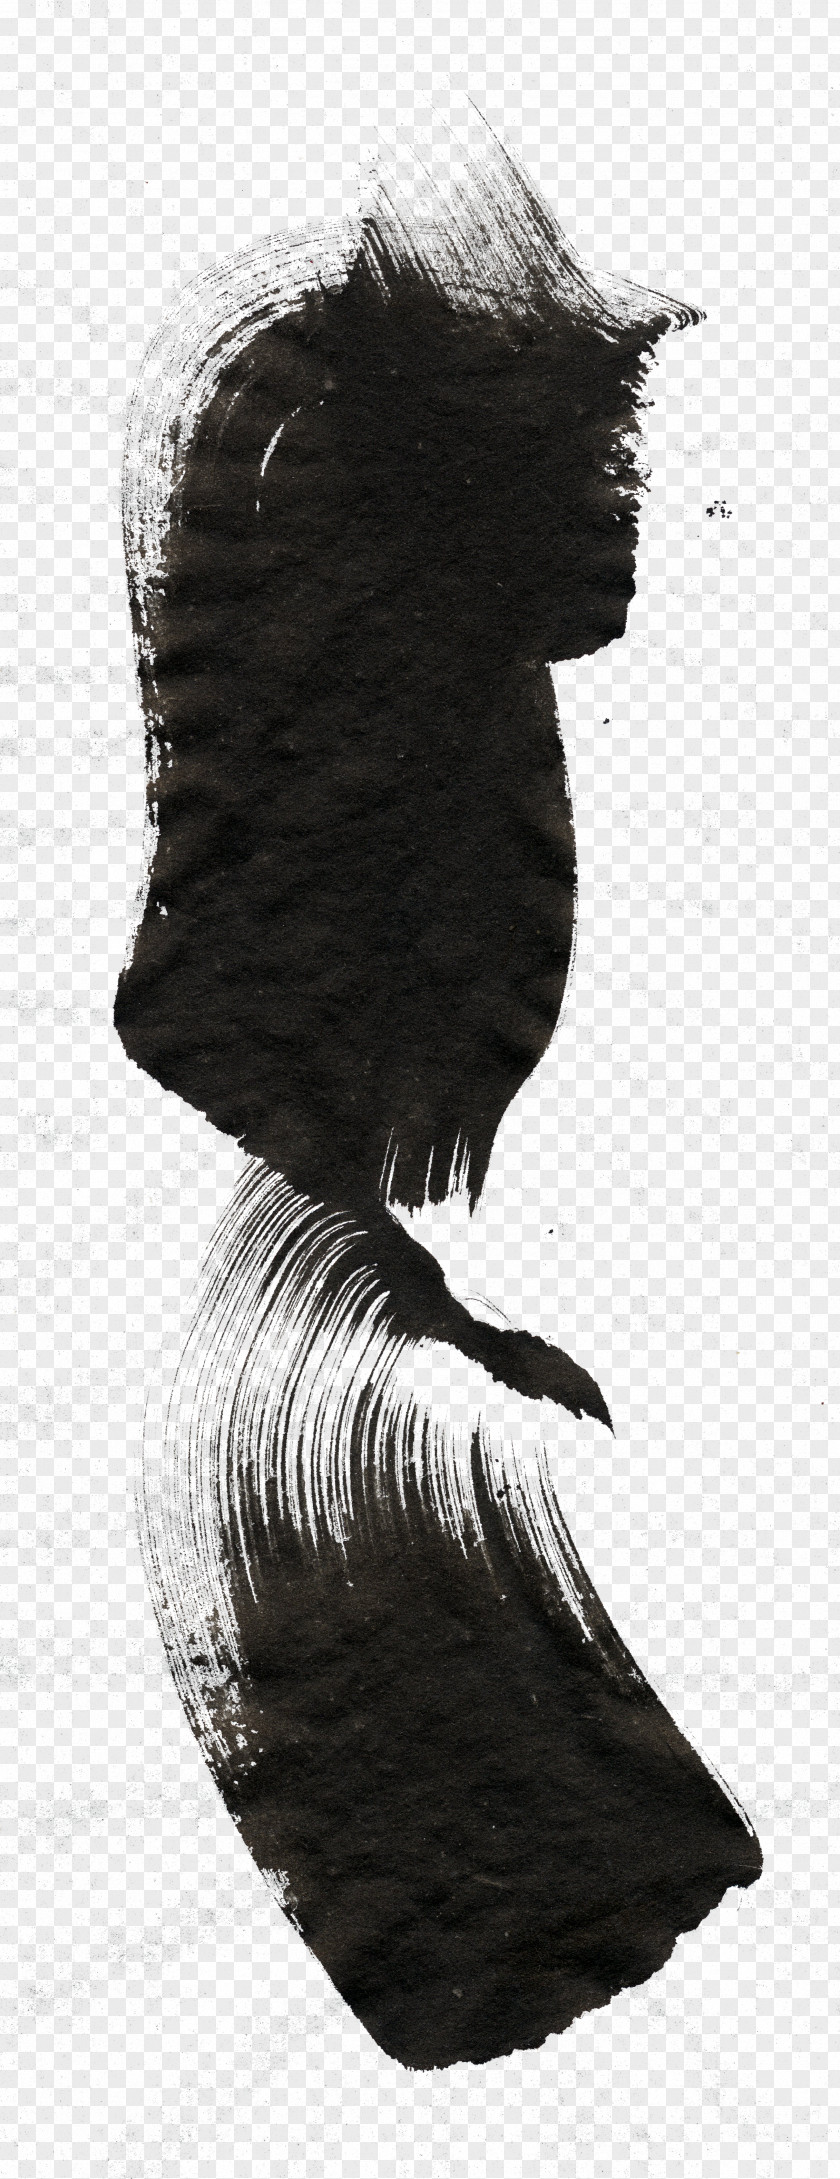 Black Hair Strokes And White Ink Brush PNG